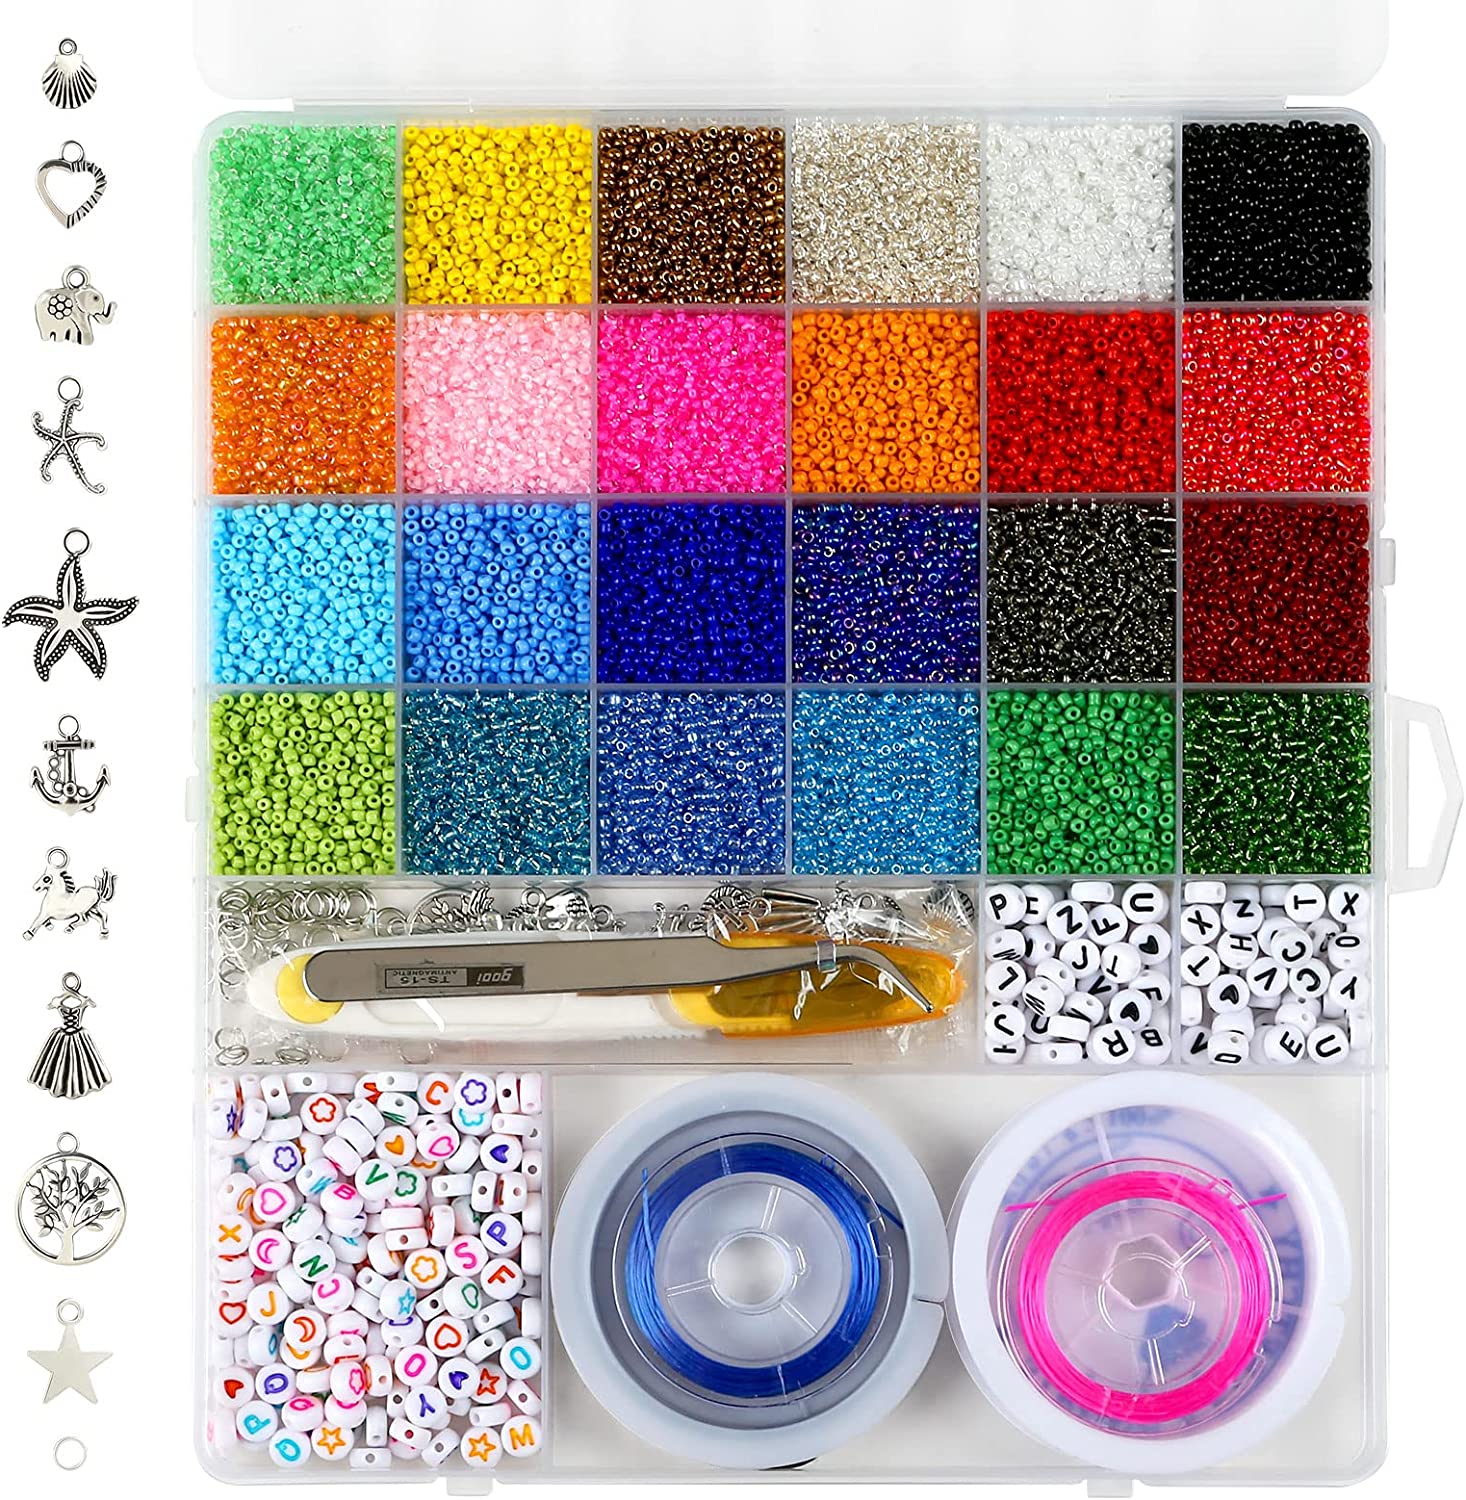 Naler Pony Bead Set, 25200Pcs in Box Glass Seed Beads, Size 2mm Seed Beads  & Letter Beads for Making Jewelry Finding Art Craft Decoration DIY